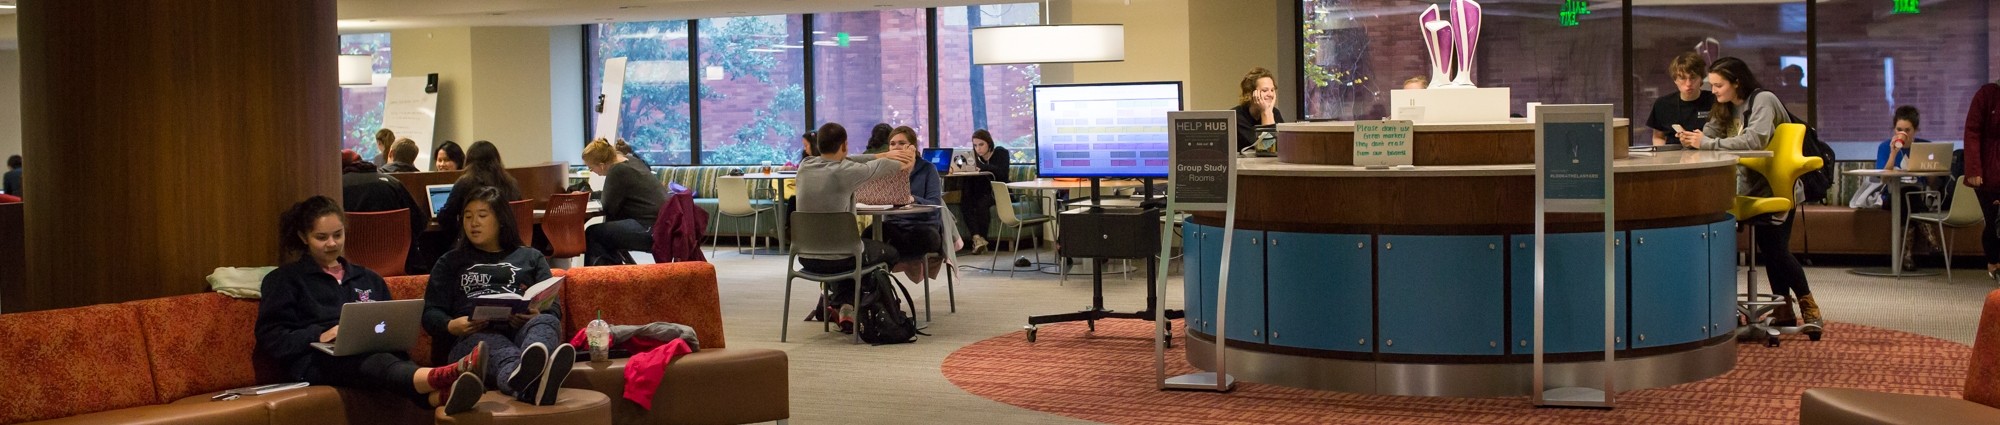 Students interact in the Helmerich Collaborative Learning Center in Bizzell Memorial Library.